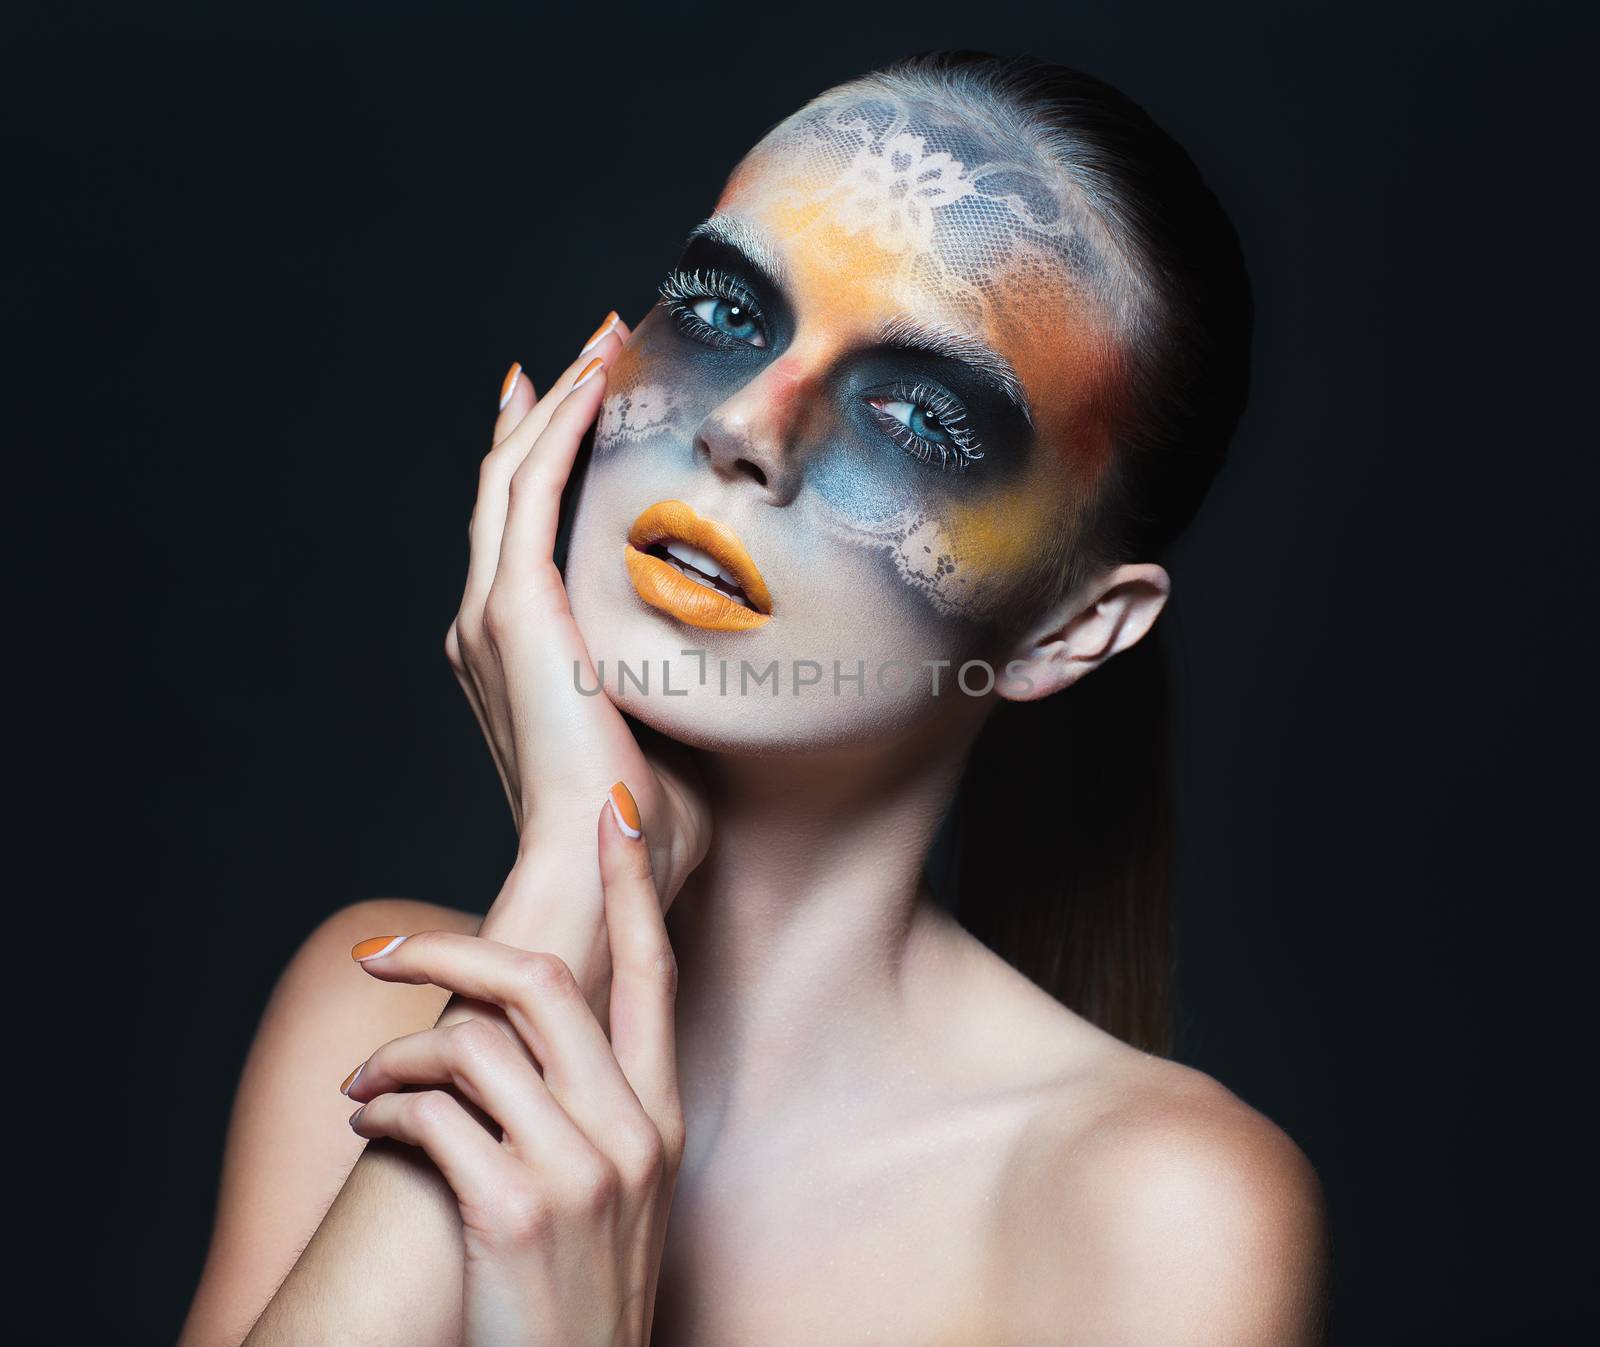 Portrait of beautiful glamor girl with dark eye make-up in the form of lace and orange lips on black